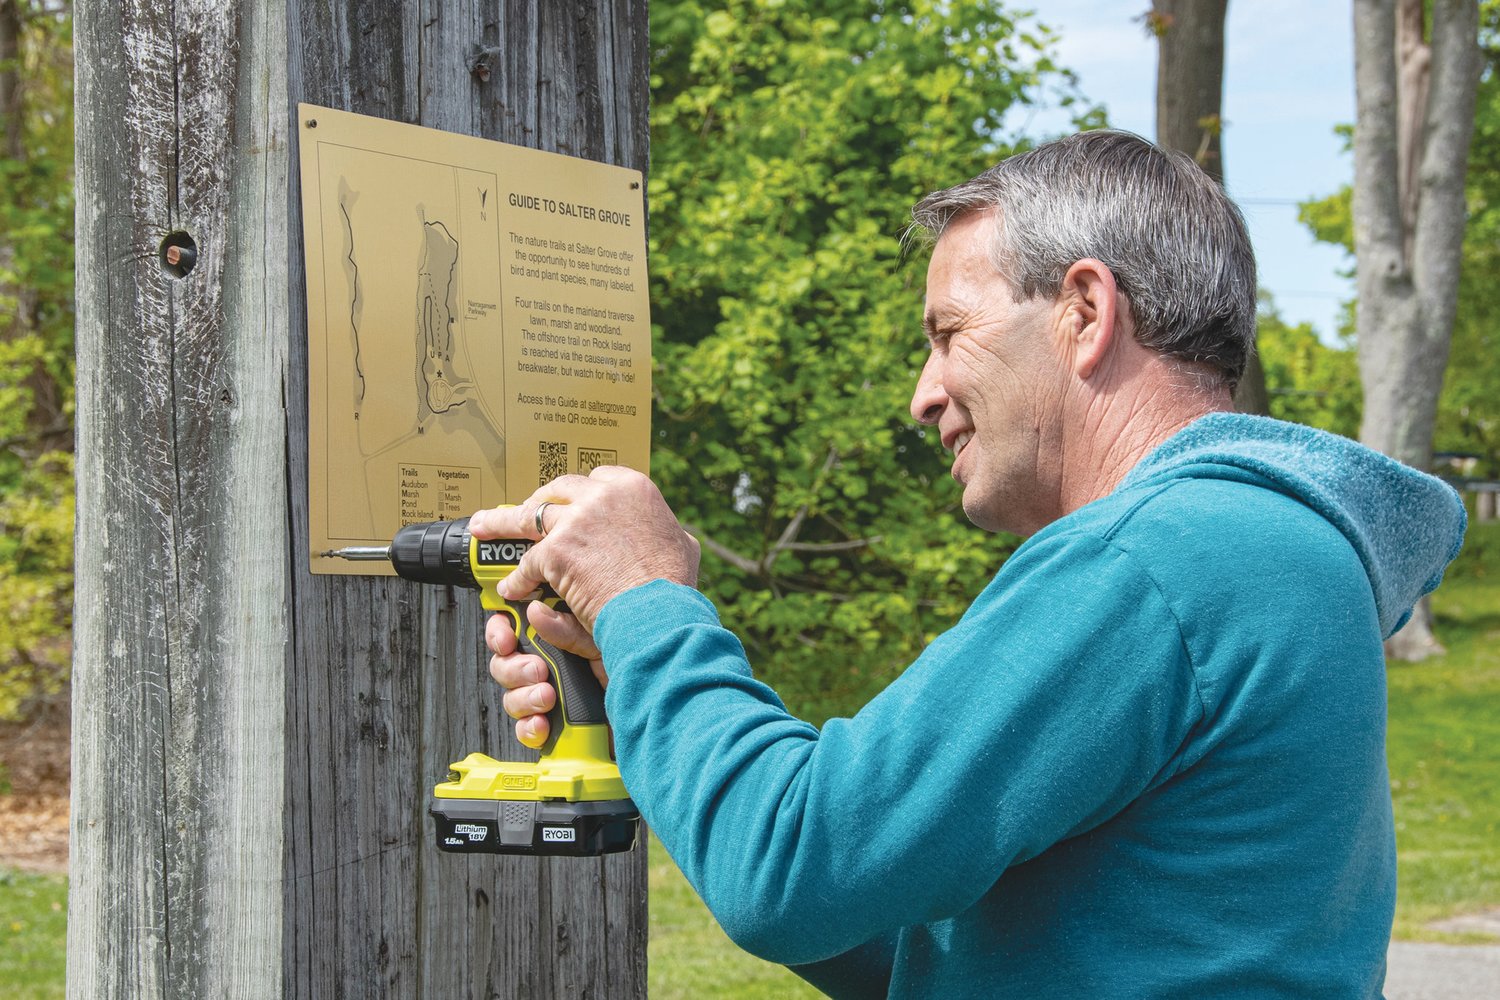 HE KNOWS WHAT HE’S DOING: Mayor Frank Picozzi goes back to his construction days as he helps to attach an orientation sign at the entrance of the park. The sign includes a QR code that will link visitors to the new online guide, as well as a trail map.